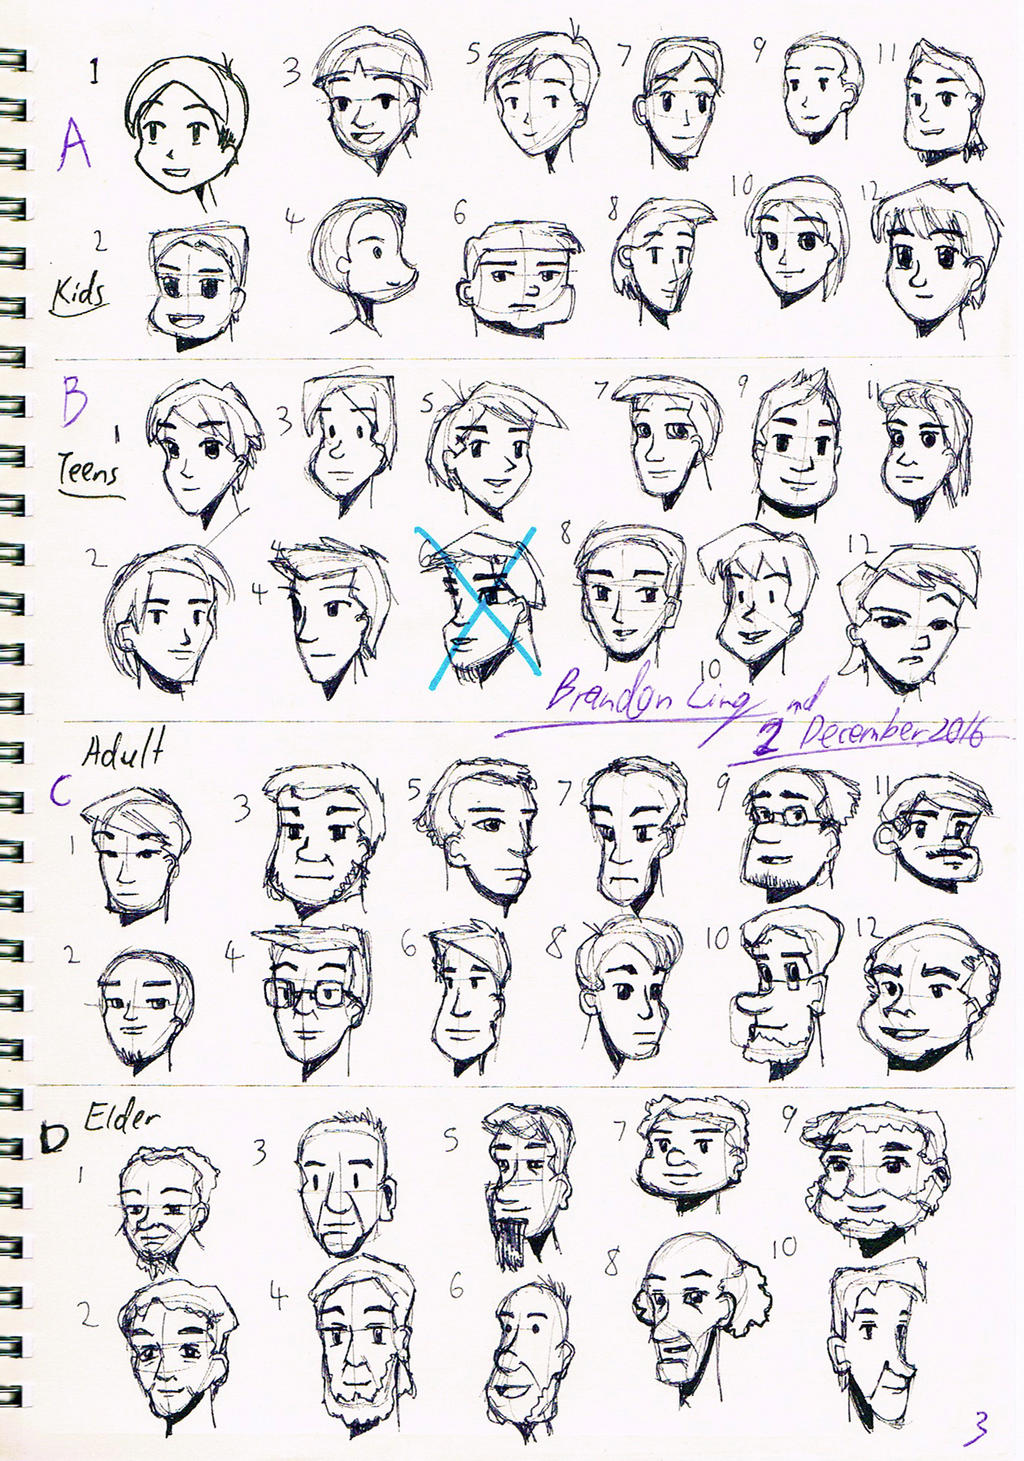 Cartoon Character Sketches- 3 (Male Face) by Brand-194 on DeviantArt